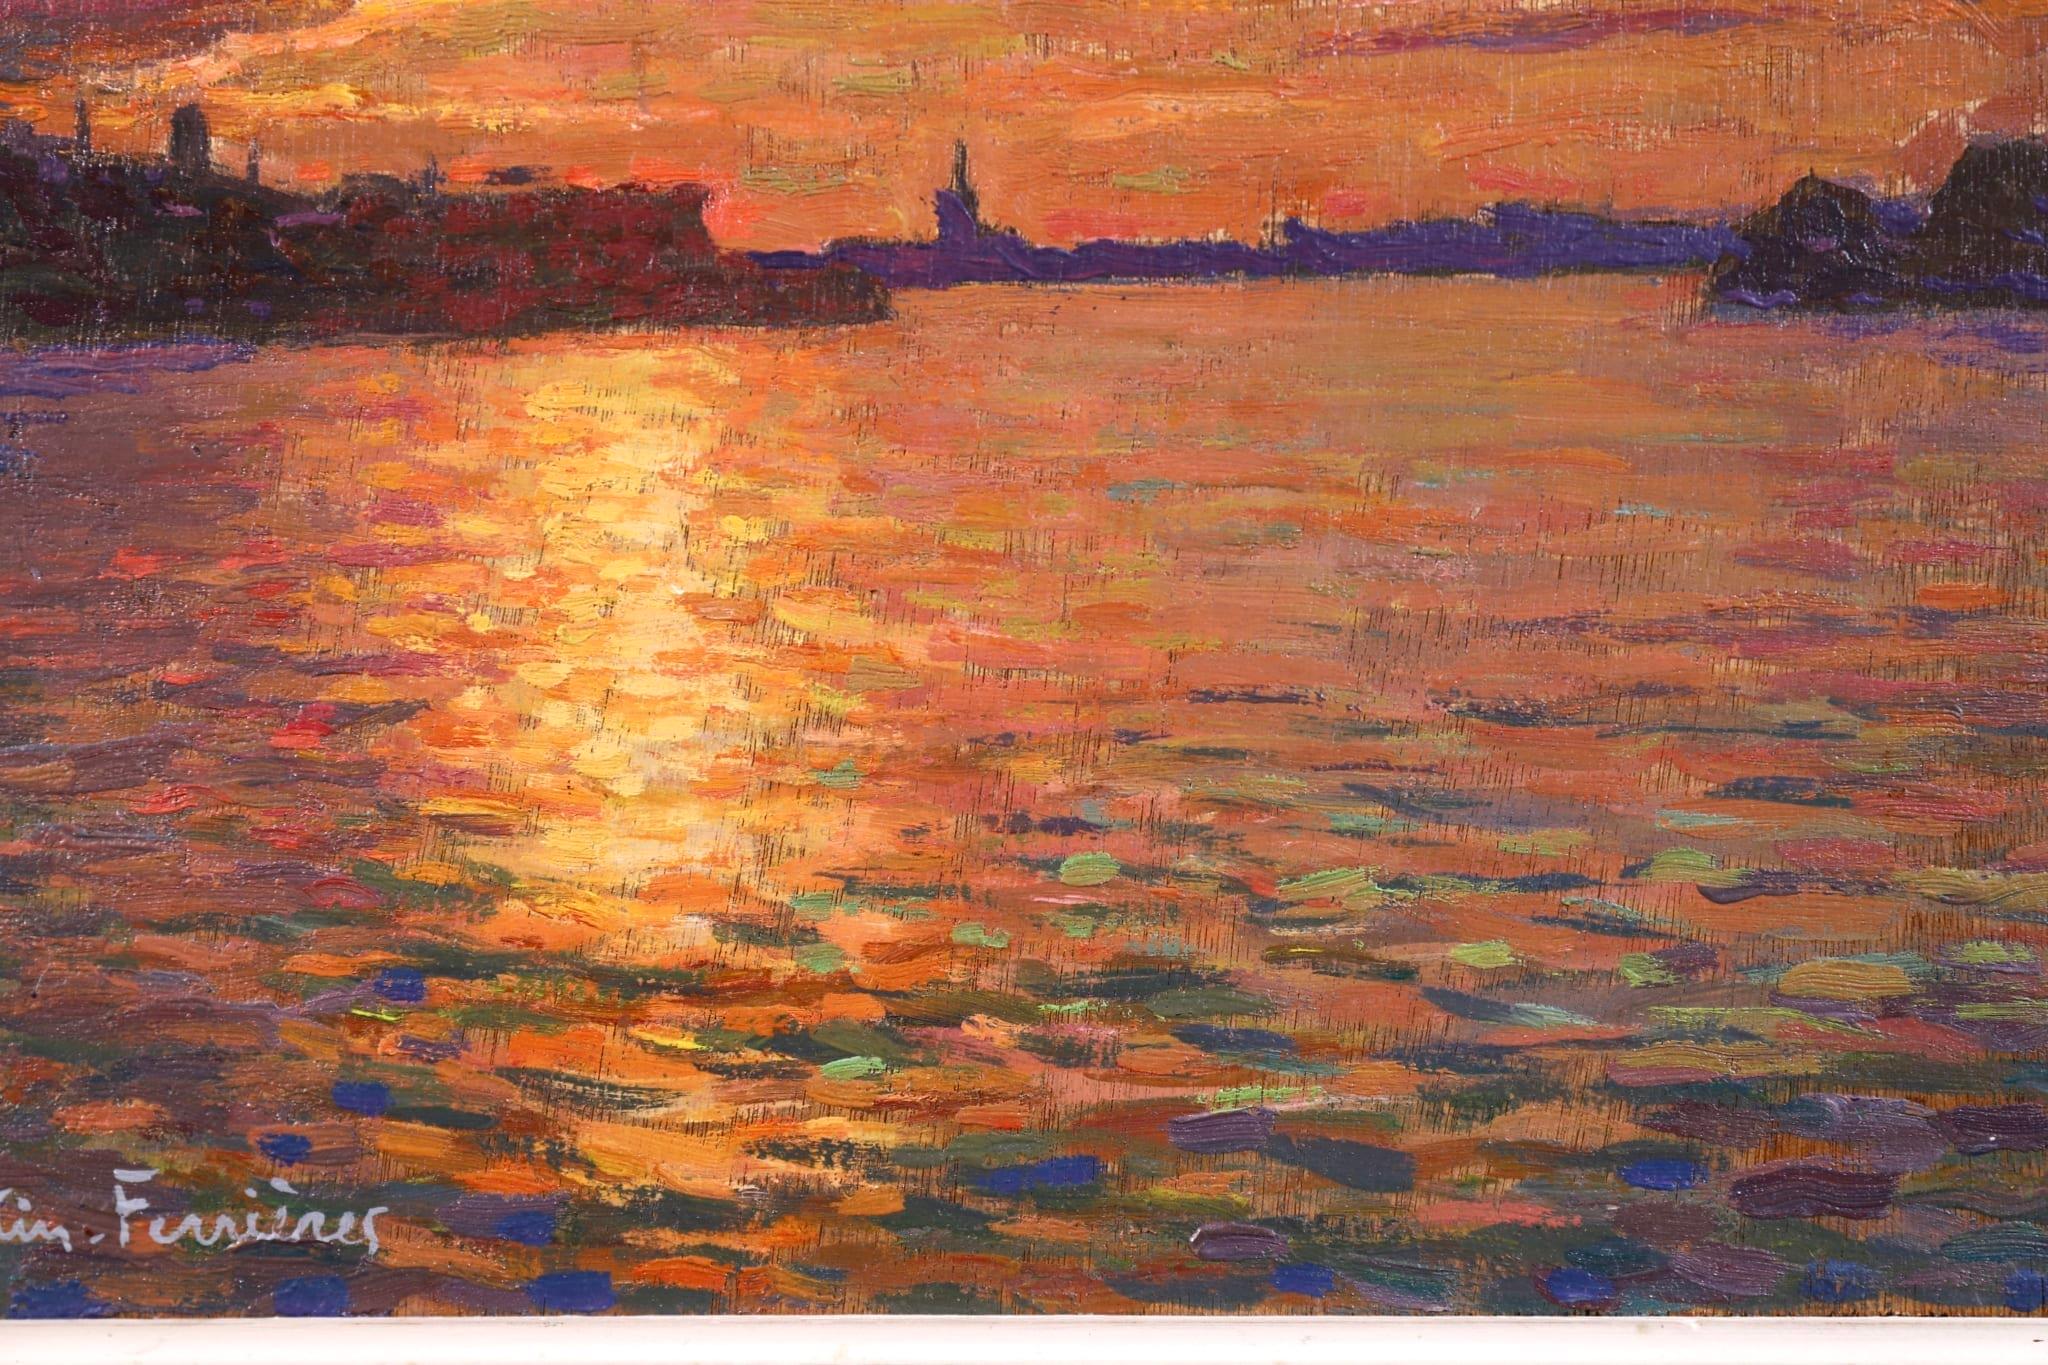 A stunning pointillist oil on panel circa 1930 by French post-impressionist painter Jacques Martin-Ferrieres depicting a view of the coastline of Amsterdam. The sunset of deep reds, oranges and purples in reflecting in the water